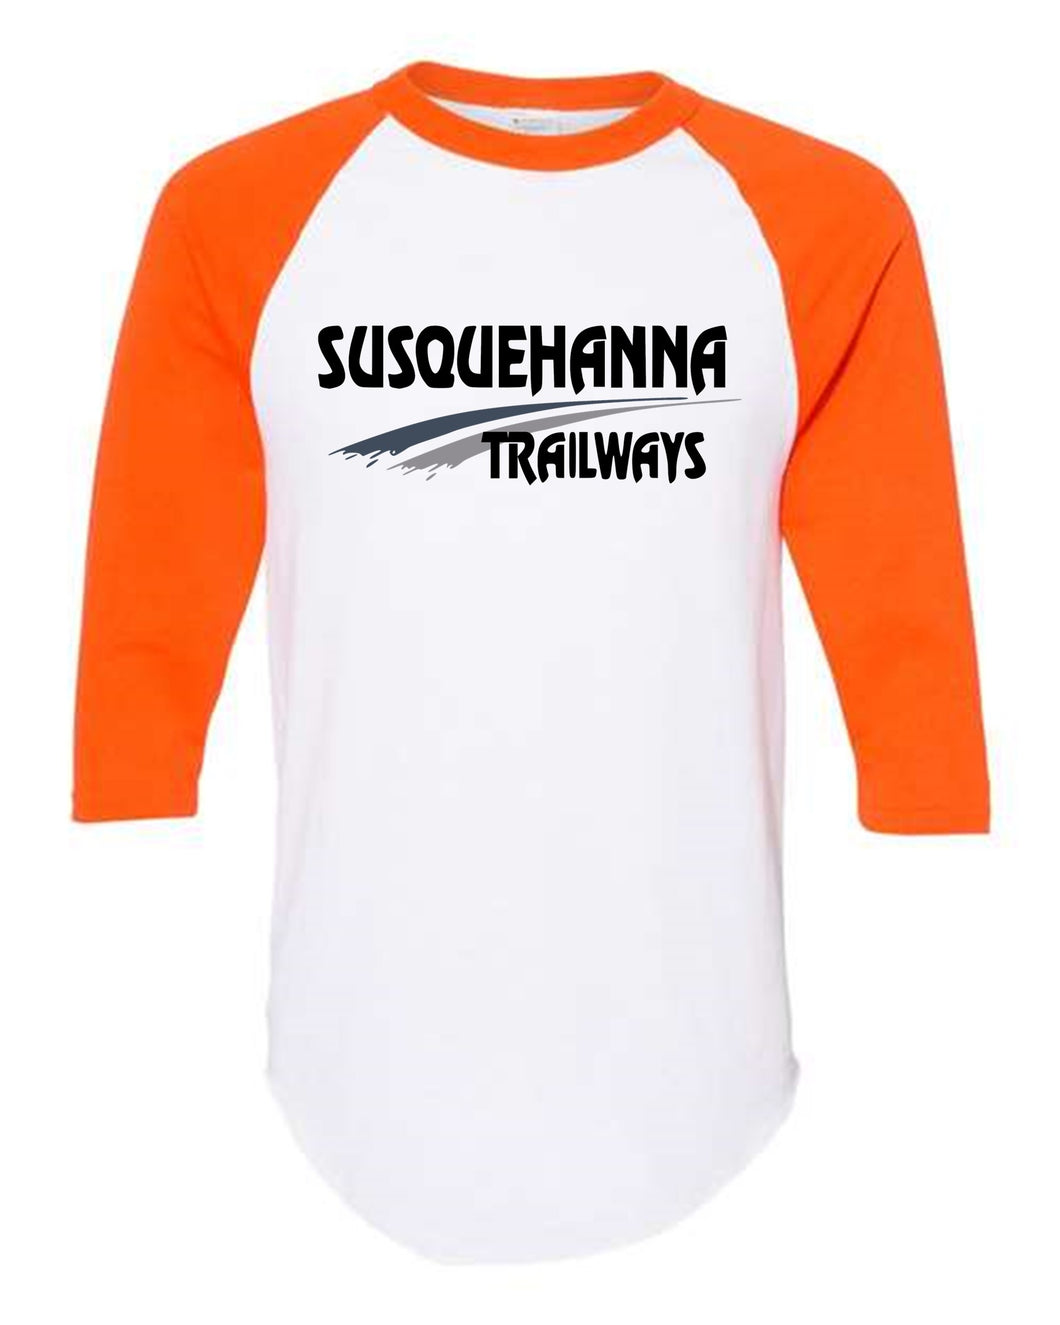 Susquehanna Trailways 3/4 Sleeve (Adult Sizes Only)